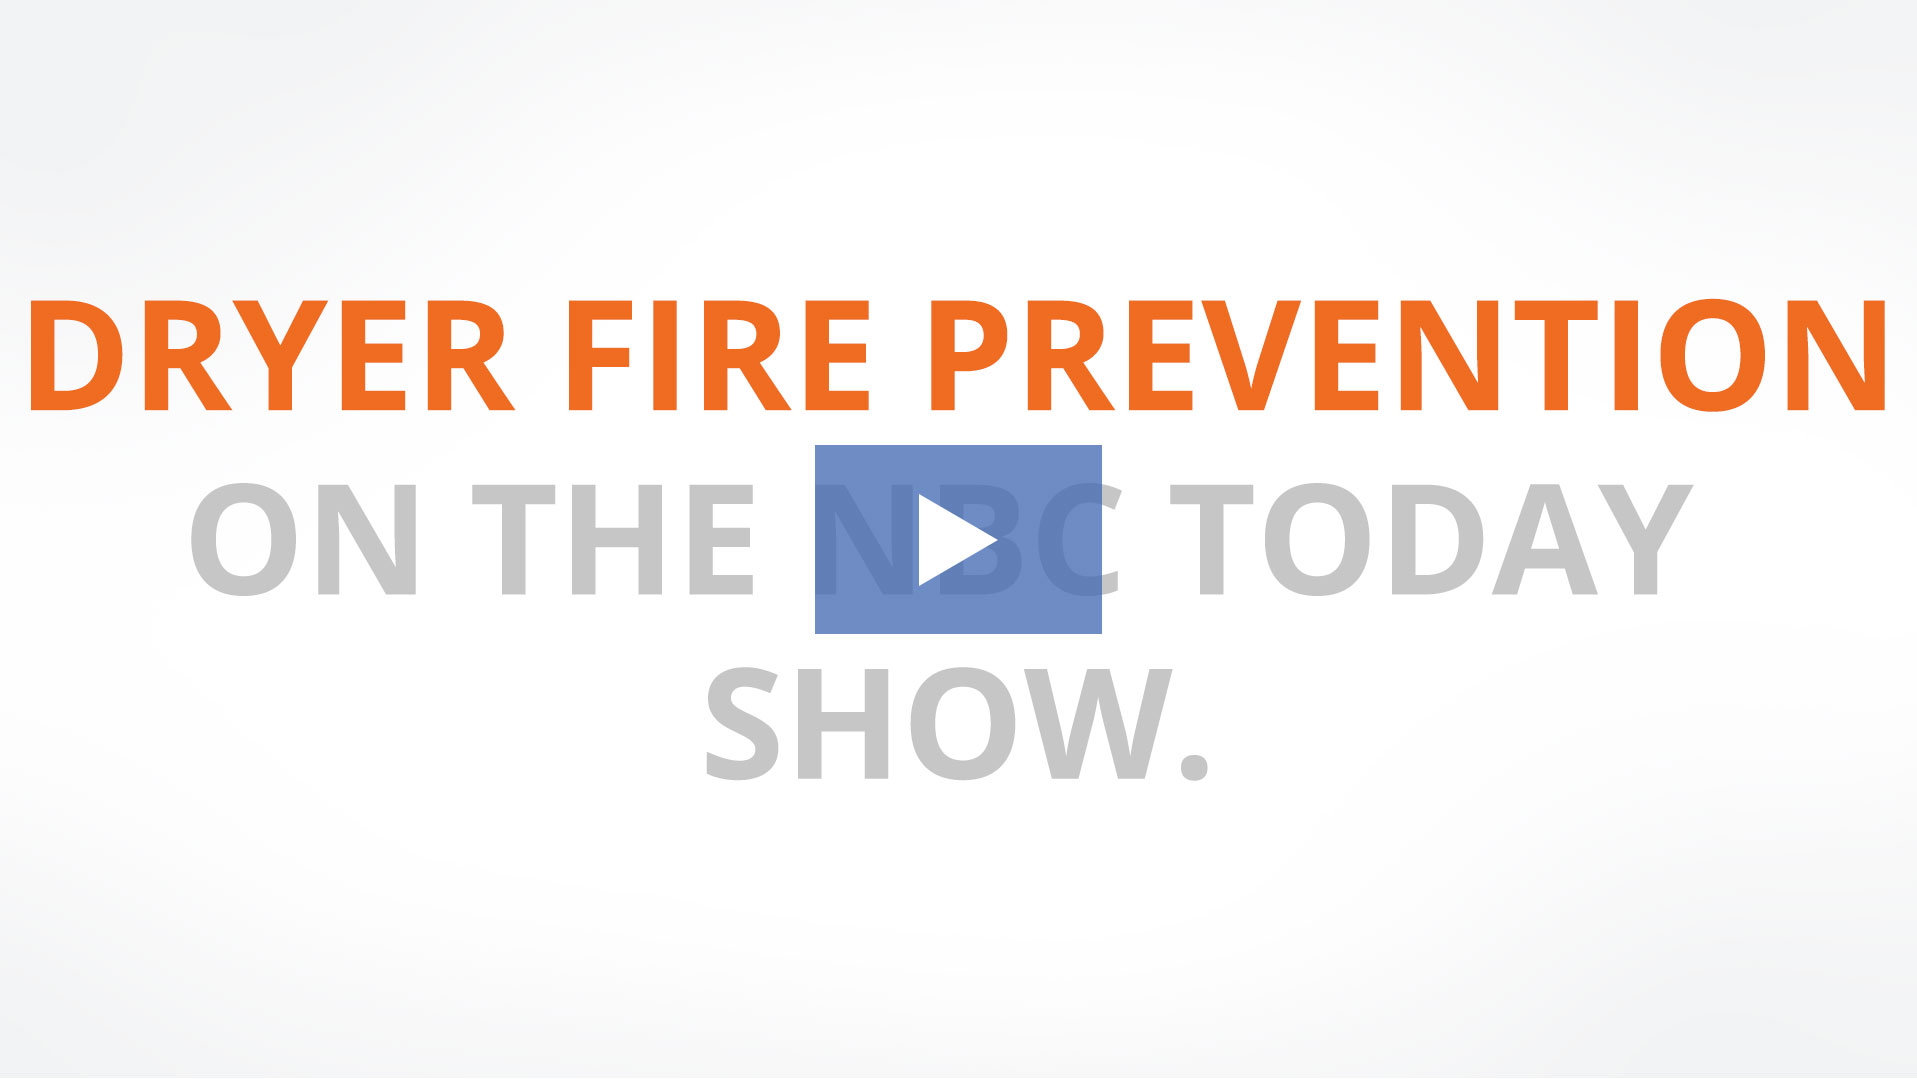 Video: Dyer Fire Prevention